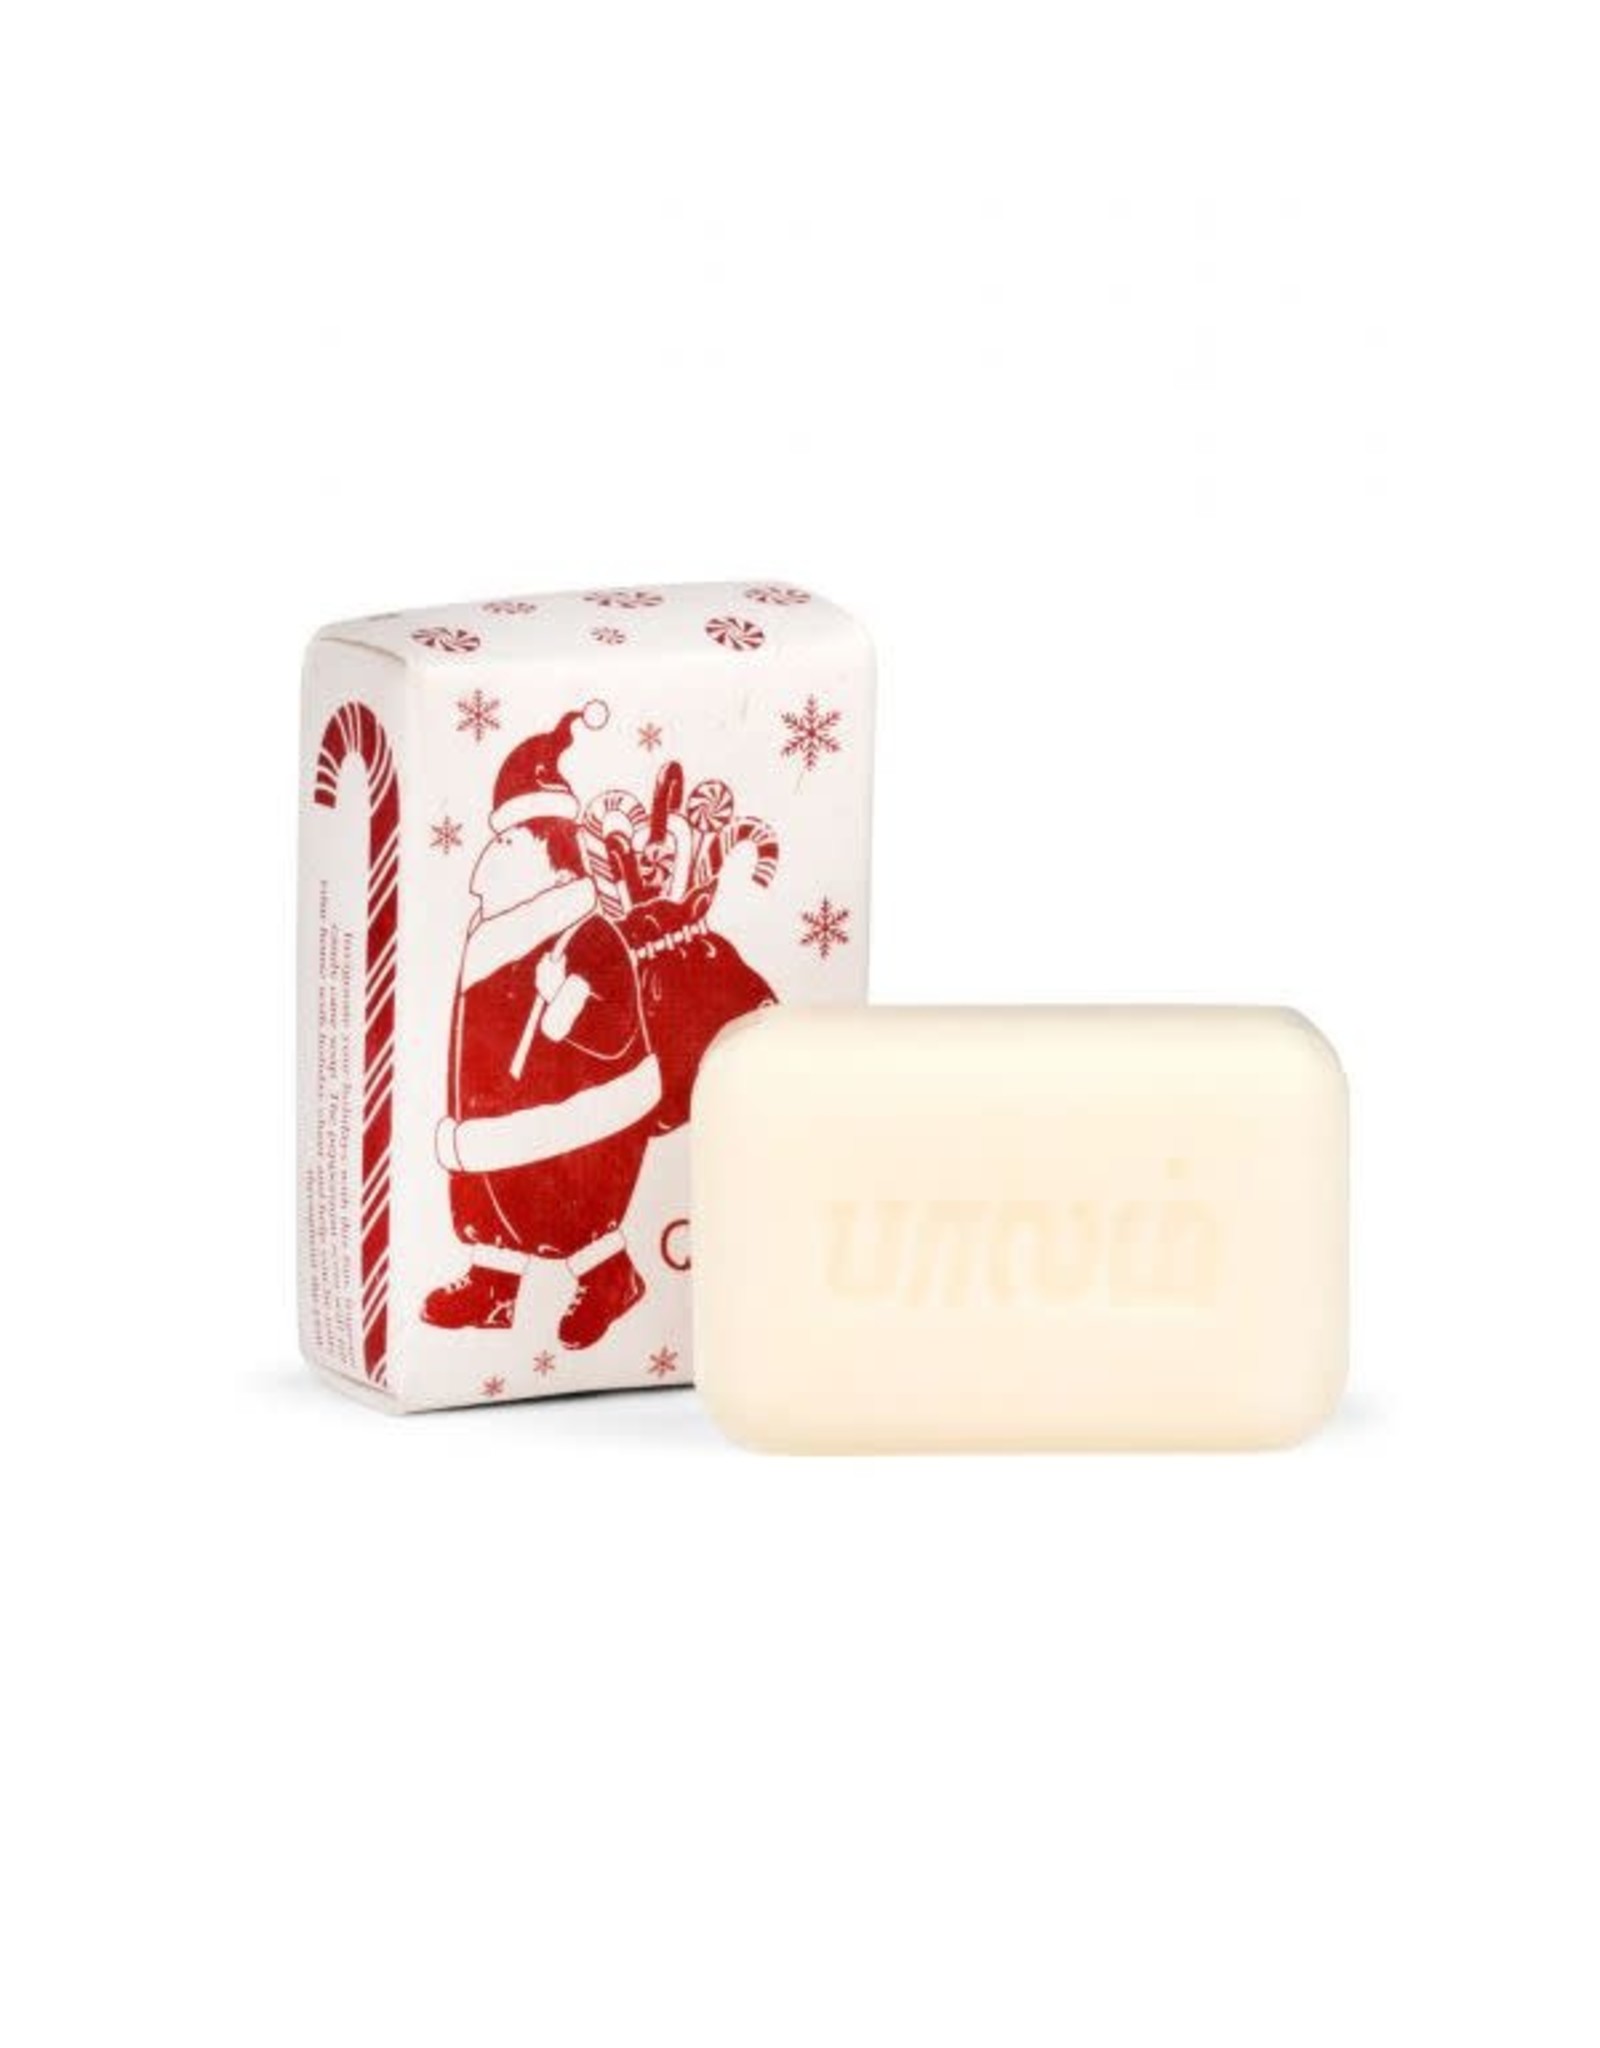 Trade roots Candy Cane Soap, India